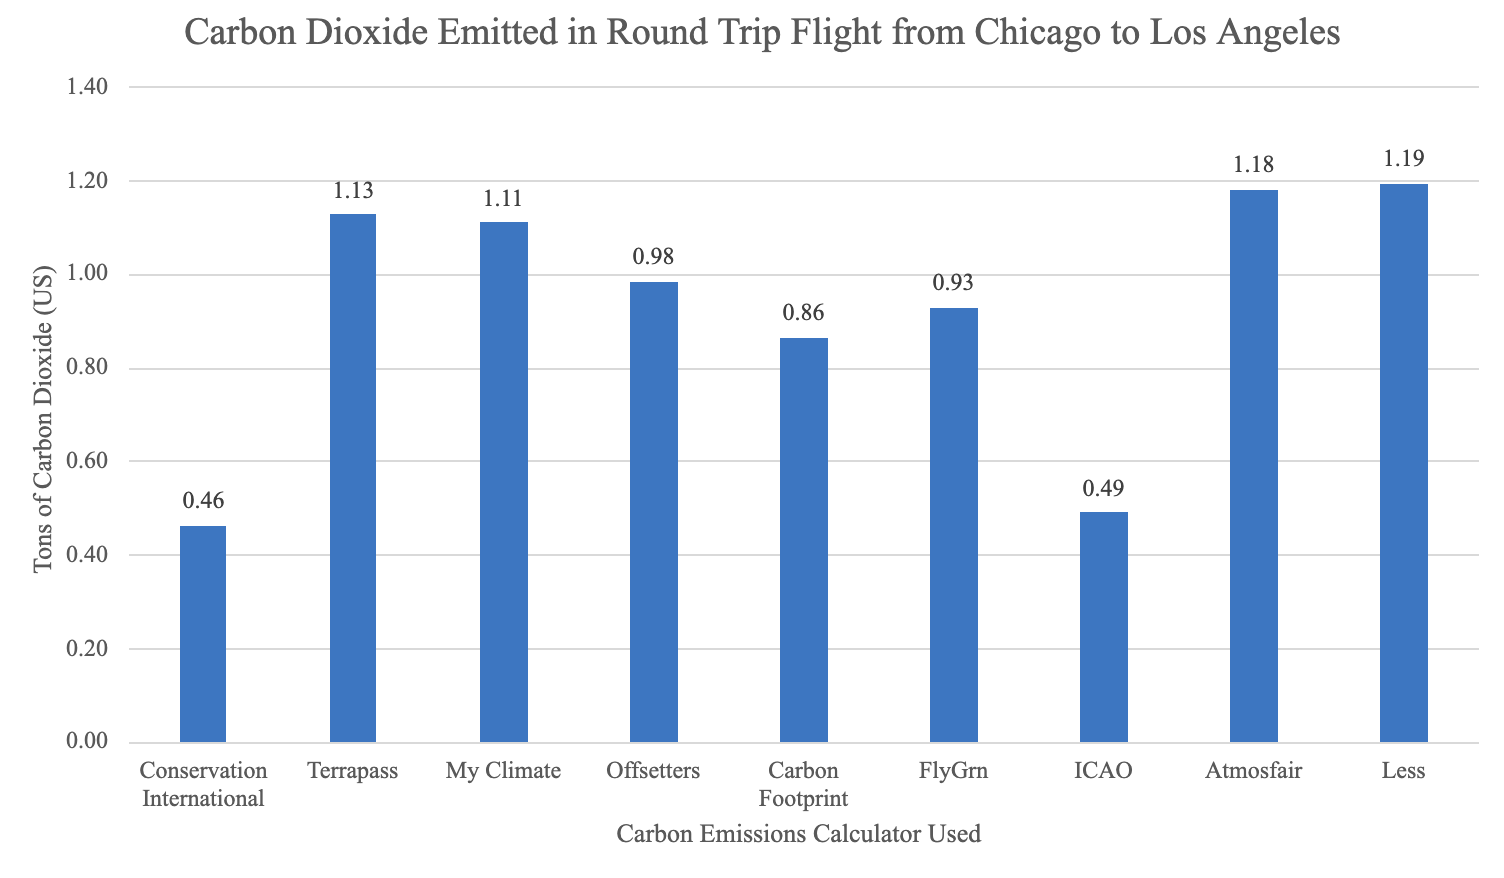 Bar grapg depicting the carbon dioxide emitted in a round trip flight from Chicago to Los Angeles according to 9 different calculators,